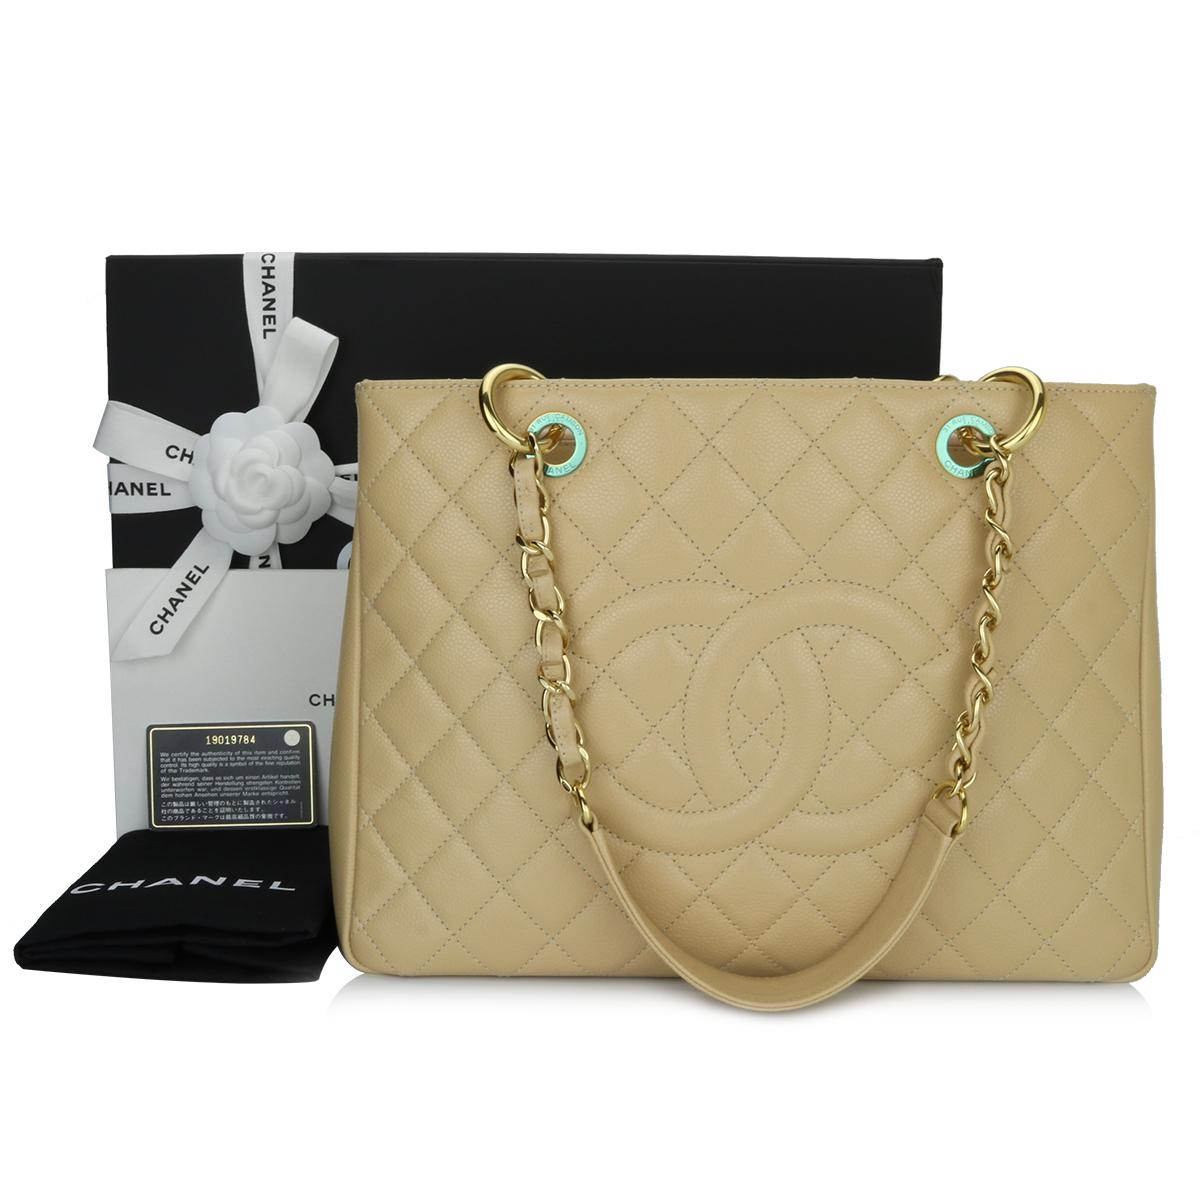 Authentic CHANEL Grand Shopping Tote (GST) Beige Clair Caviar with Gold Hardware 2014.

This stunning bag is still in mint condition; it still keeps its original shape well and the hardware still very shiny, leather smells fresh as if new.

Exterior